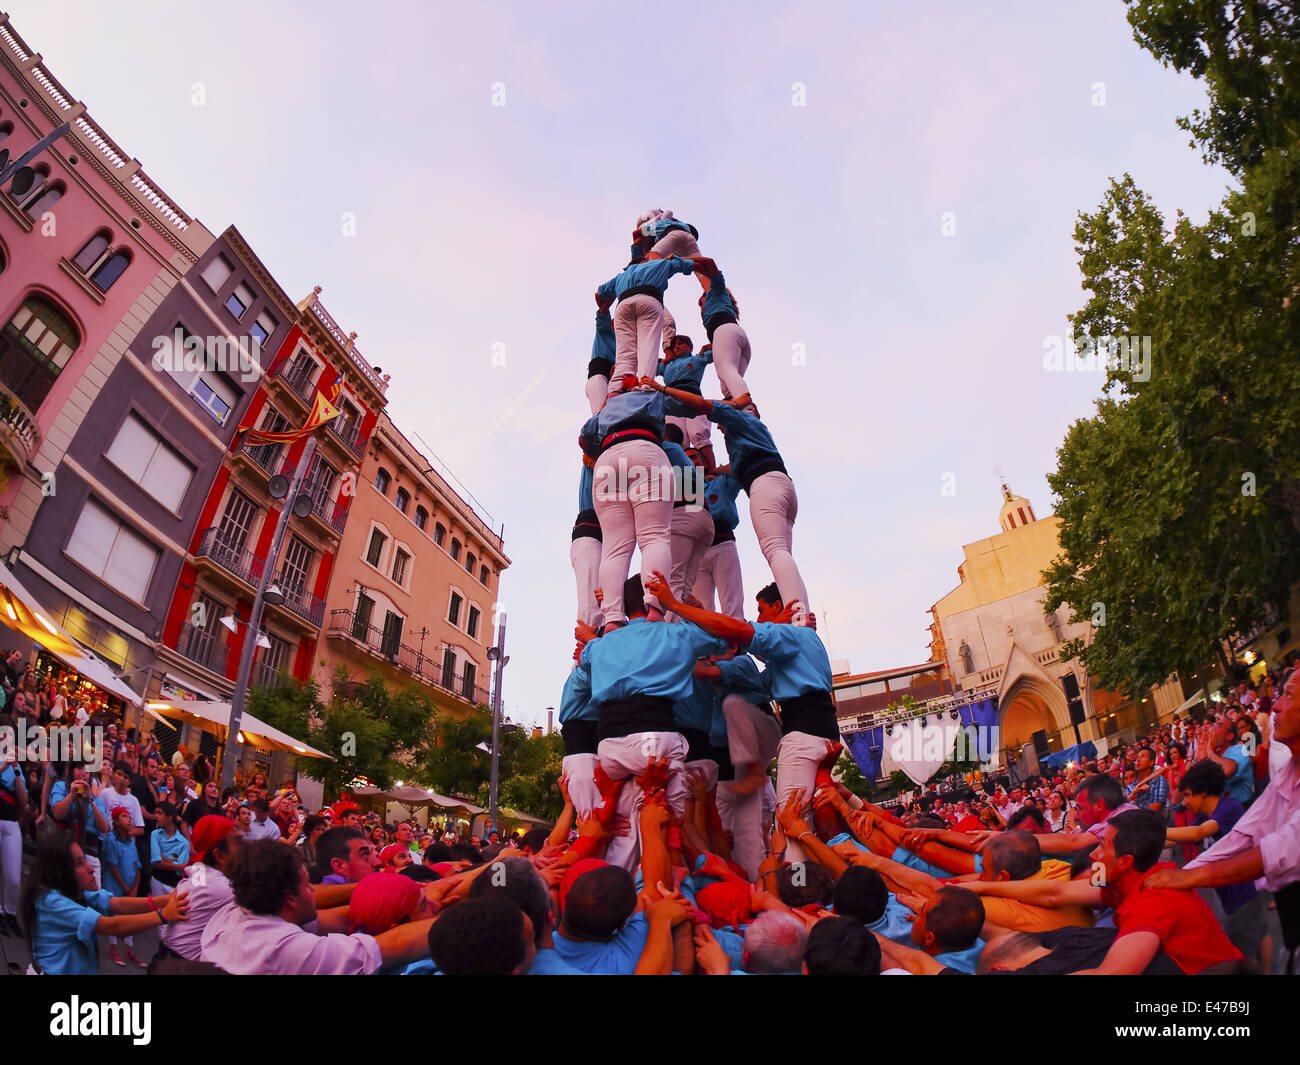 Castells Performance in Terrassa, Catalonia, Spain. A castell is a human tower built traditionally in festivals. Stock Photo